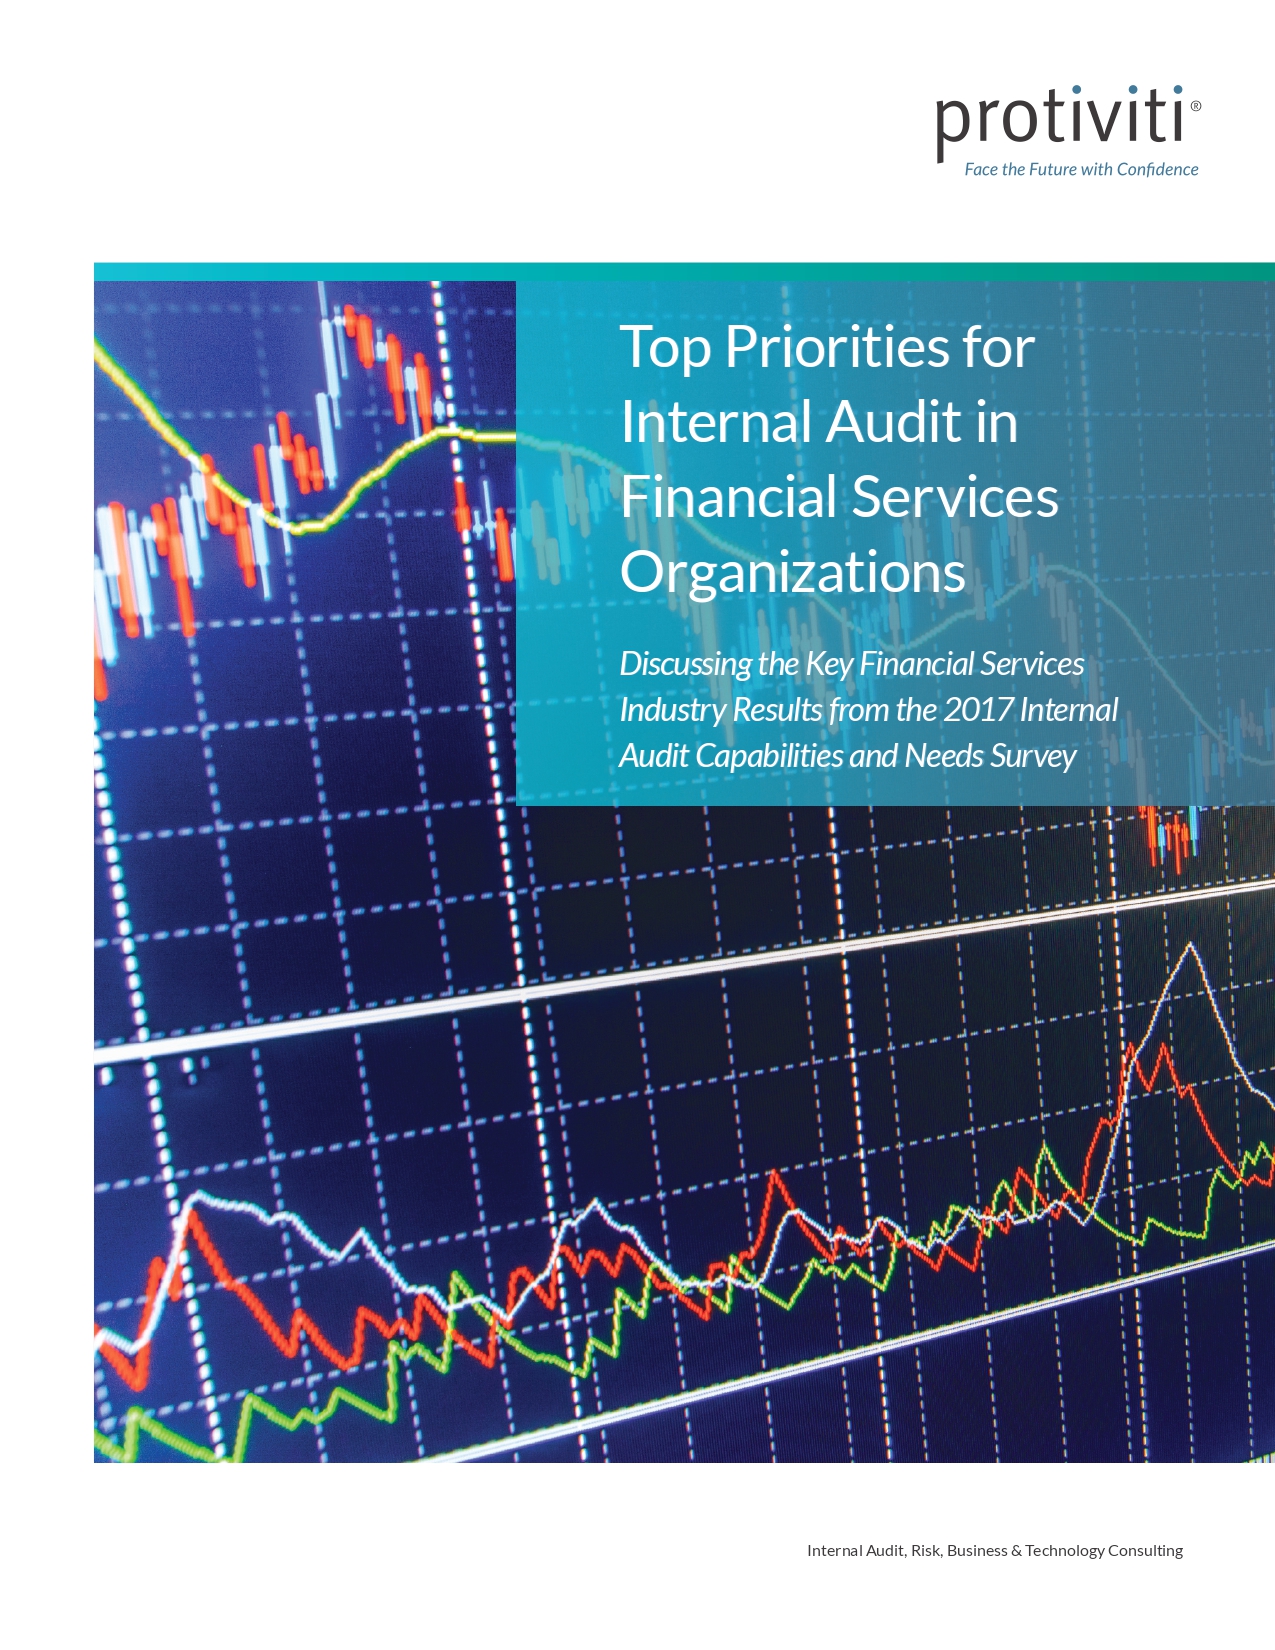 Screenshot of the first page of Top Priorities for Internal Audit in Financial Services Organizations 2017